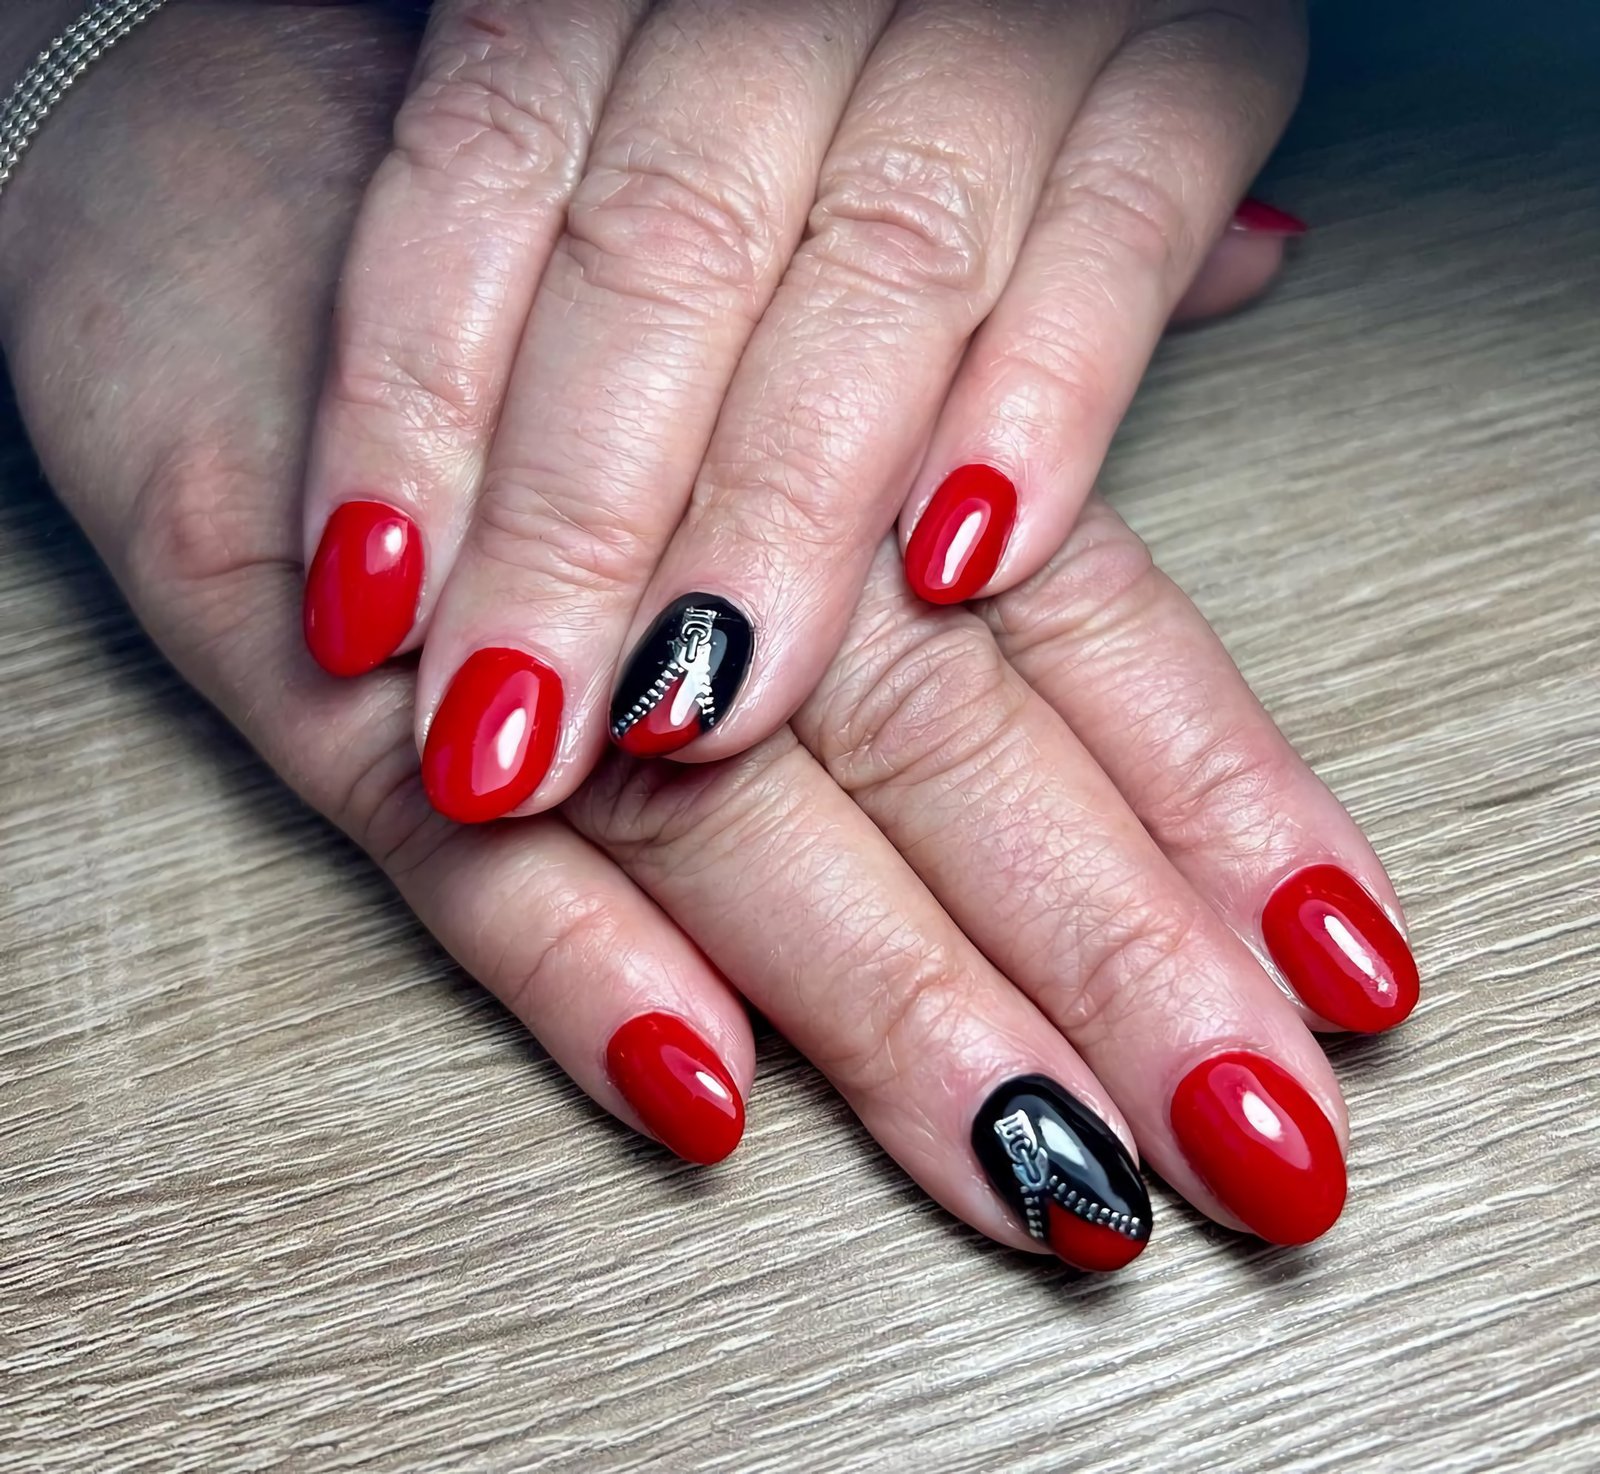 beautiful red manicure with a unique design